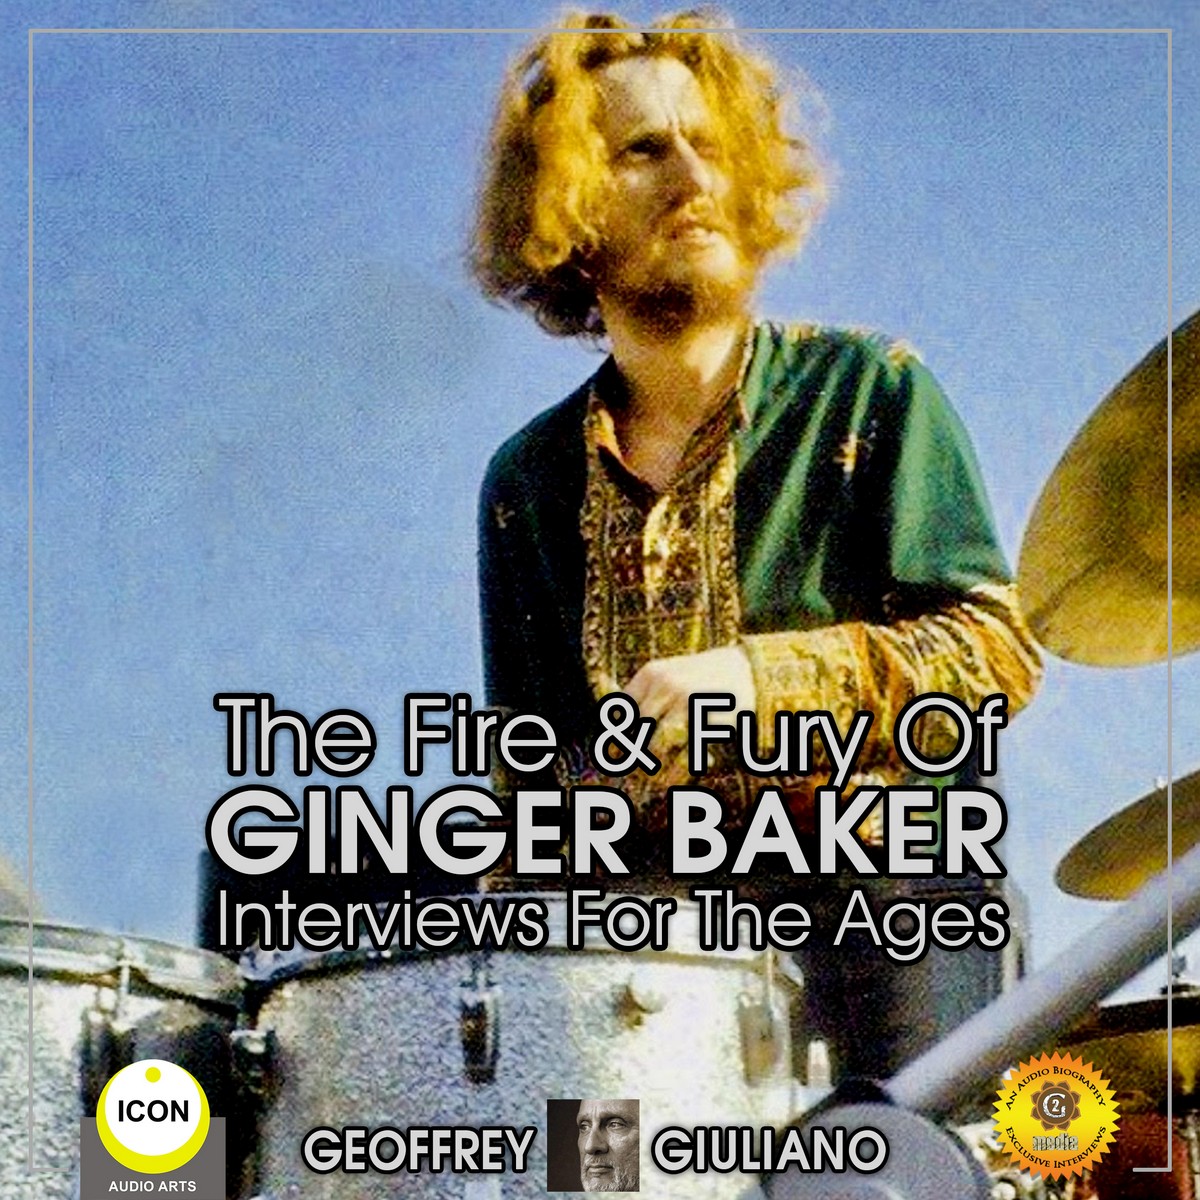 The Fire & Fury Of Ginger Baker – Interviews For The Ages